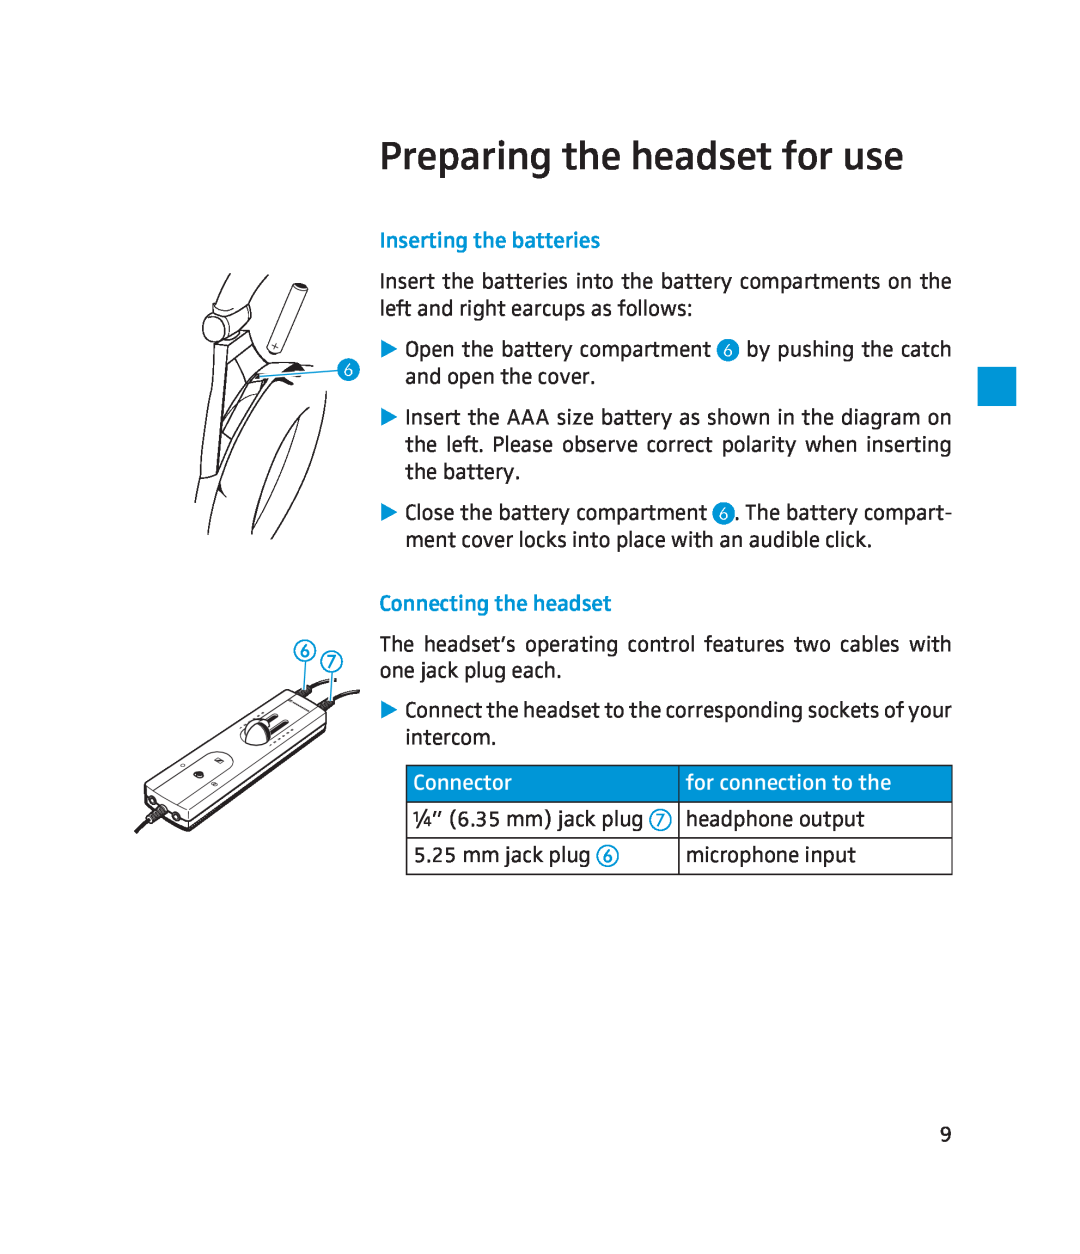 Sennheiser 250 instruction manual Preparing the headset for use, Inserting the batteries, Connecting the headset, Connector 